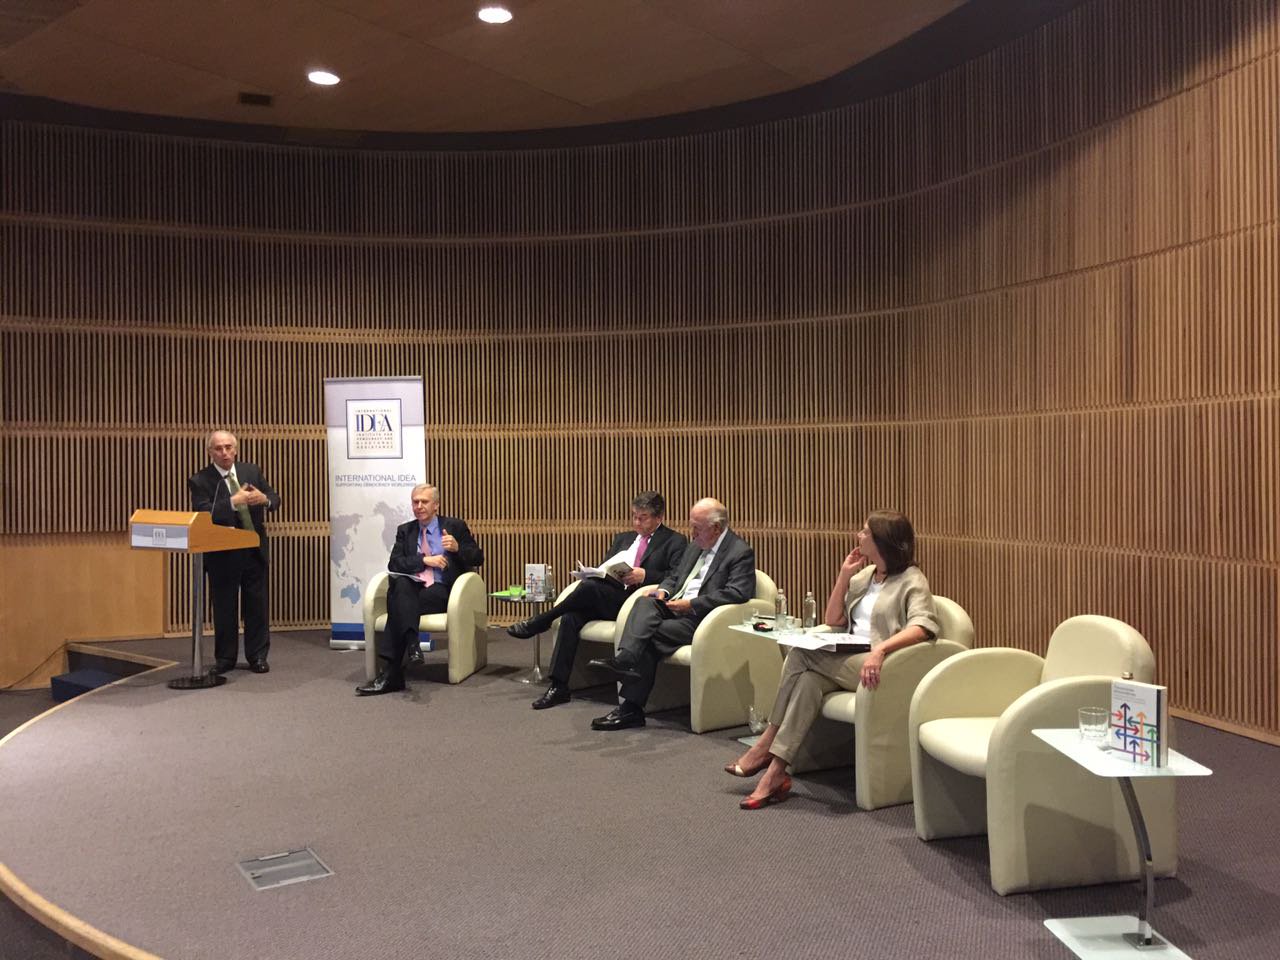 International IDEA Secretary-General Yves Leterme takes part in a panel discussion on democratic transitions in Santiago, Chile.